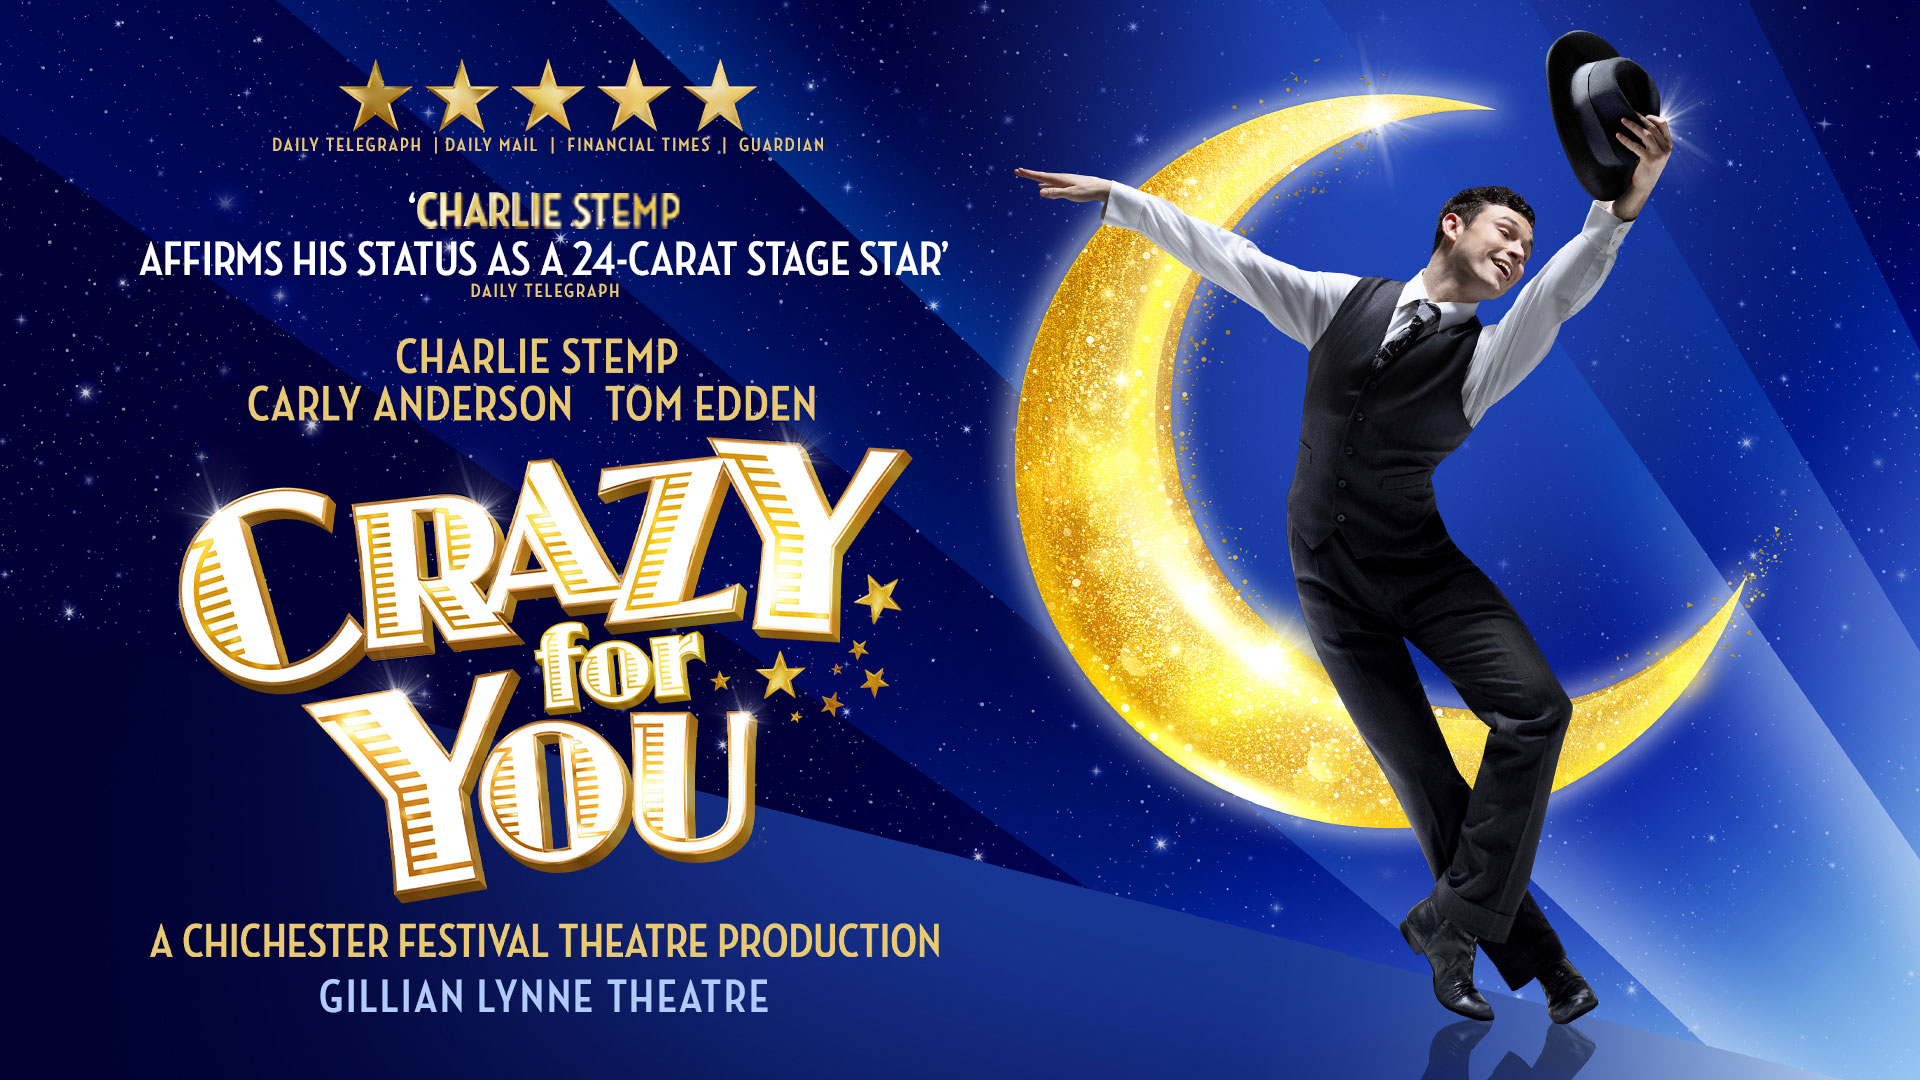 ***** Daily Telegraph, Daily Mail, Financial Times & Guardian 'CHARLIE STEMP AFFIRMS HIS STATUS AS A 24-CARAT STAGE STAR' - Daily Telegraph Charlie Stemp Carly Anderson Tom Edden CRAZY FOR YOU A Chichester Festival Theatre Production Gillian Lynne Theatre